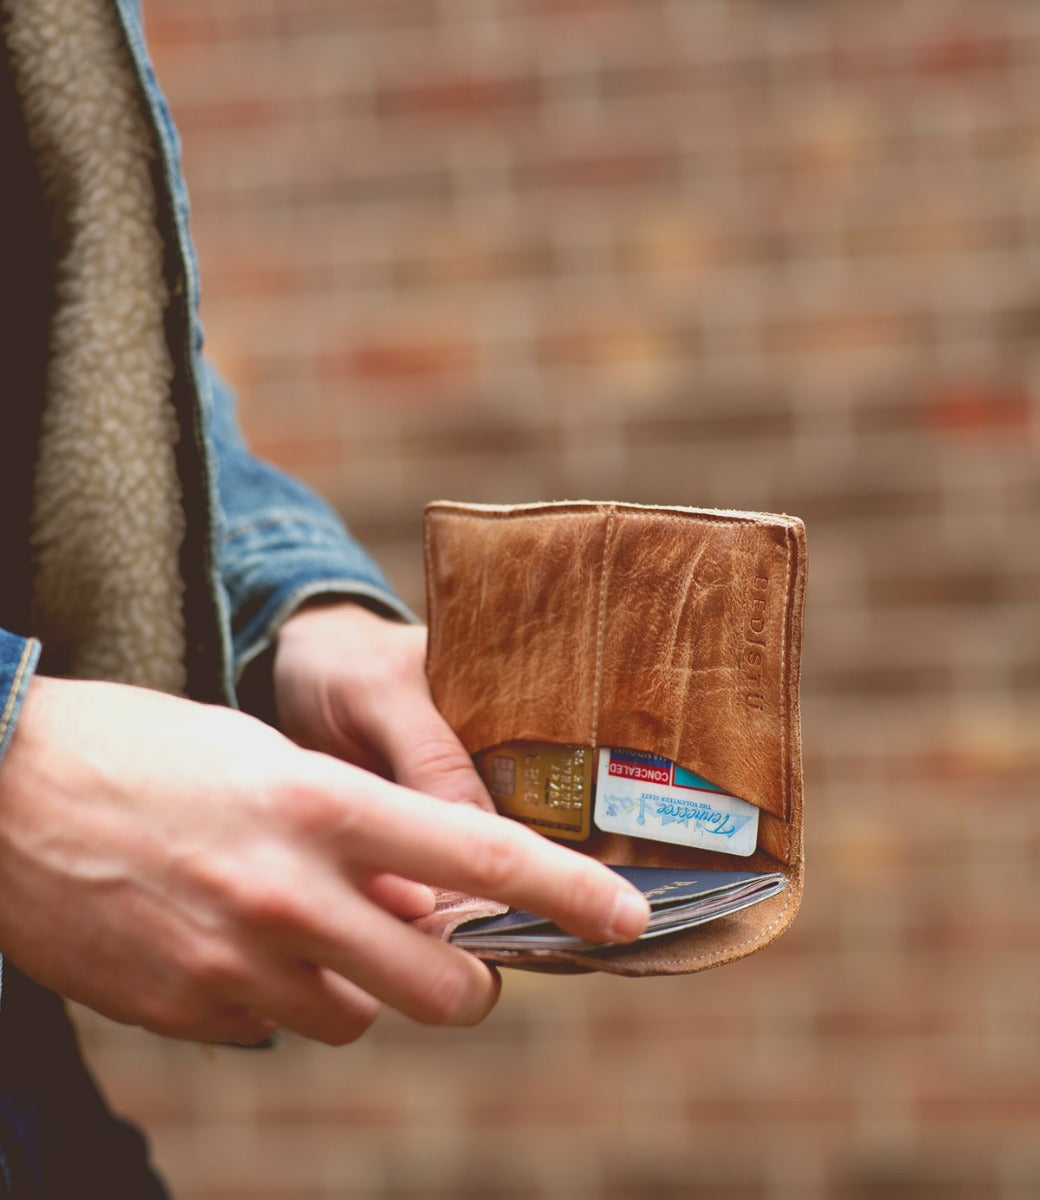 A man holding a Stardust wallet with a credit card in it from the brand Bed Stu.